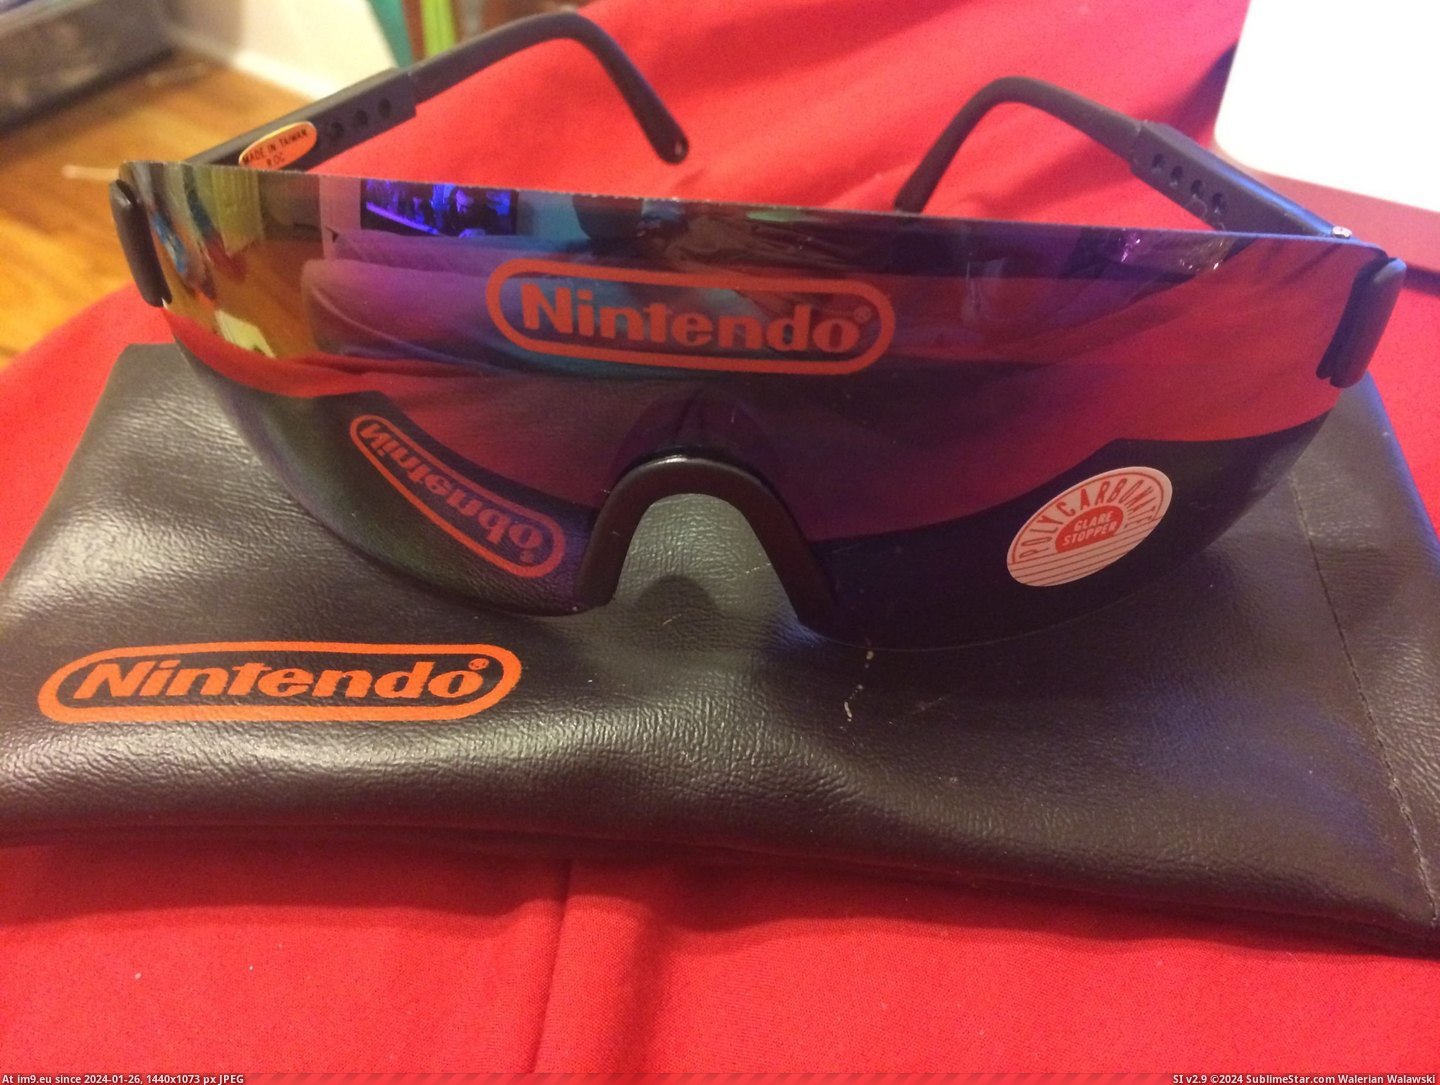 #Gaming #Storage #Unit #Sunglasses #Grandfather #Nintendo [Gaming] Anyone know anything about these Nintendo sunglasses? My Grandfather found them in his storage unit today. Pic. (Изображение из альбом My r/GAMING favs))